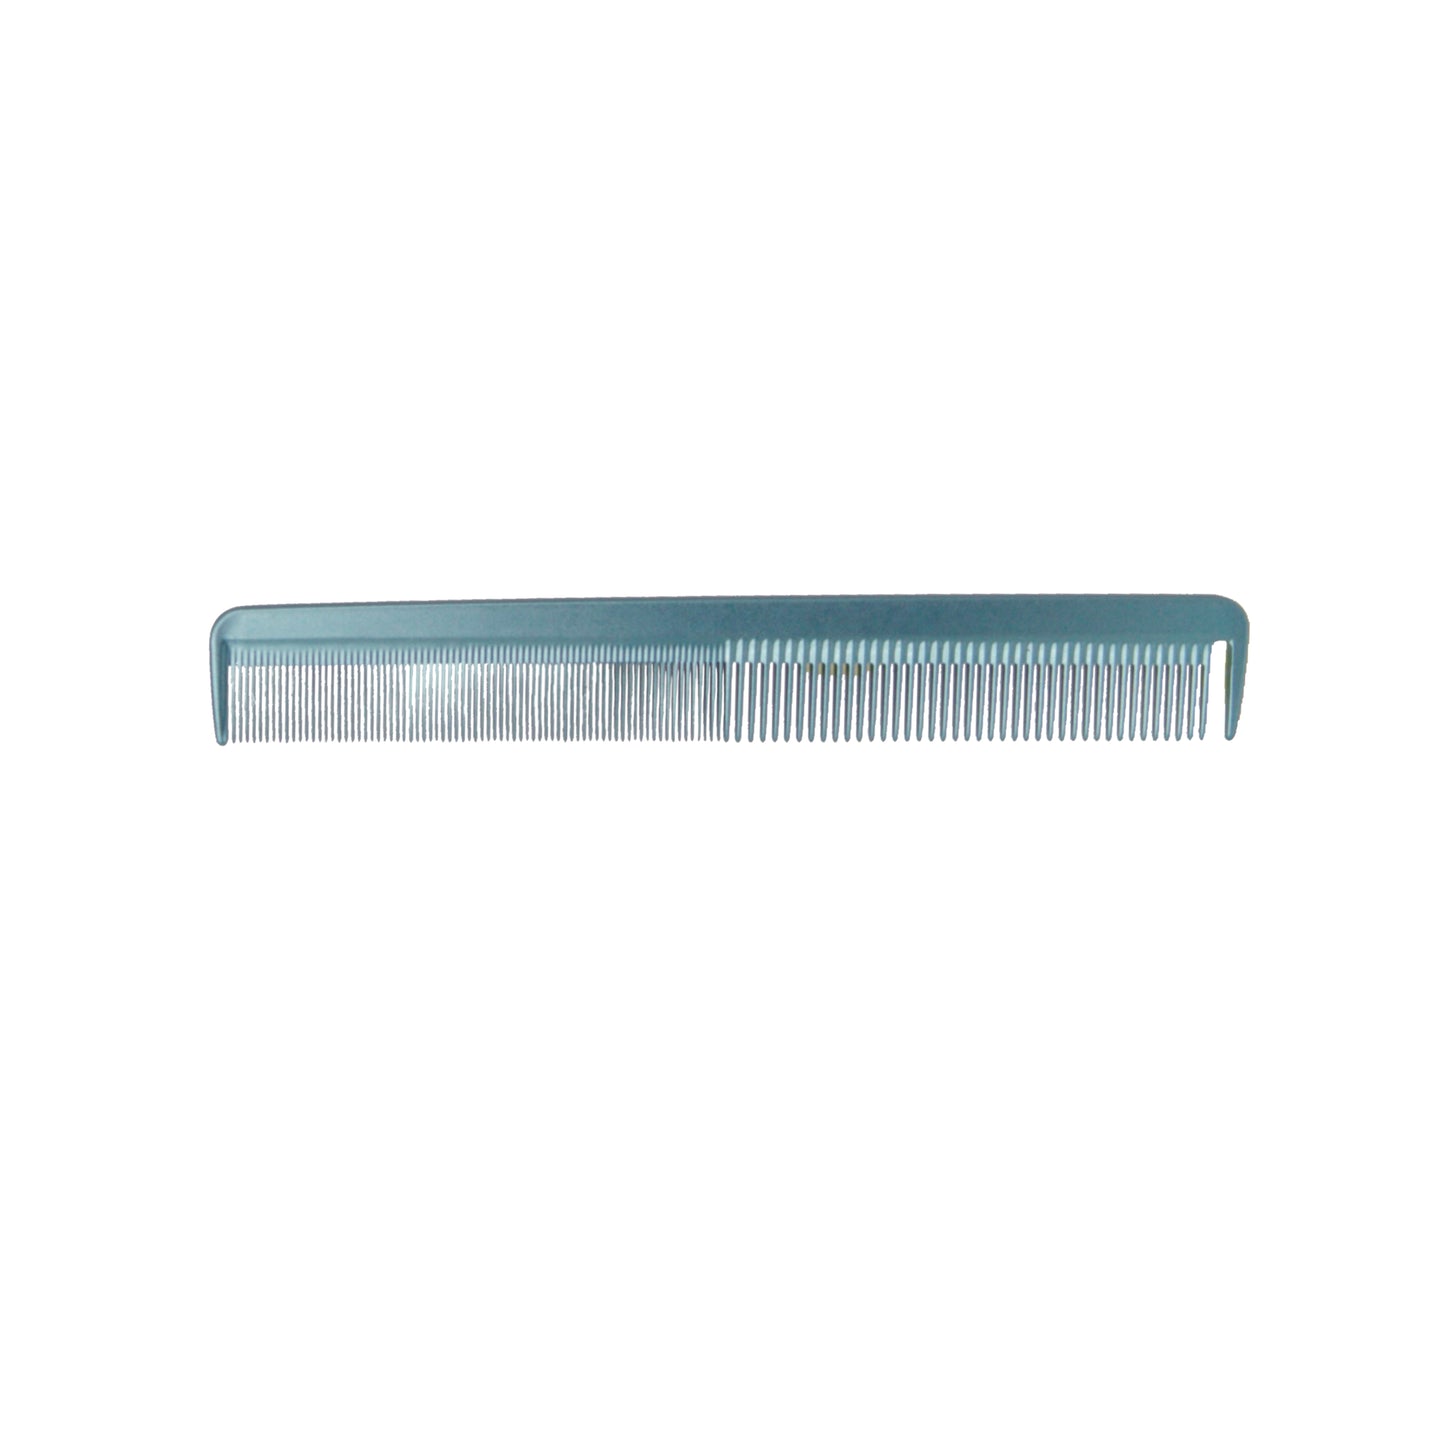 Pegasus MICOLOR 211, 9in Hard Rubber Cutting Comb With Sectioning Tooth, Anti Static, Heat and Chemically Resistant, Wet Hair, Everyday Grooming Comb | Peines de goma dura - Blue